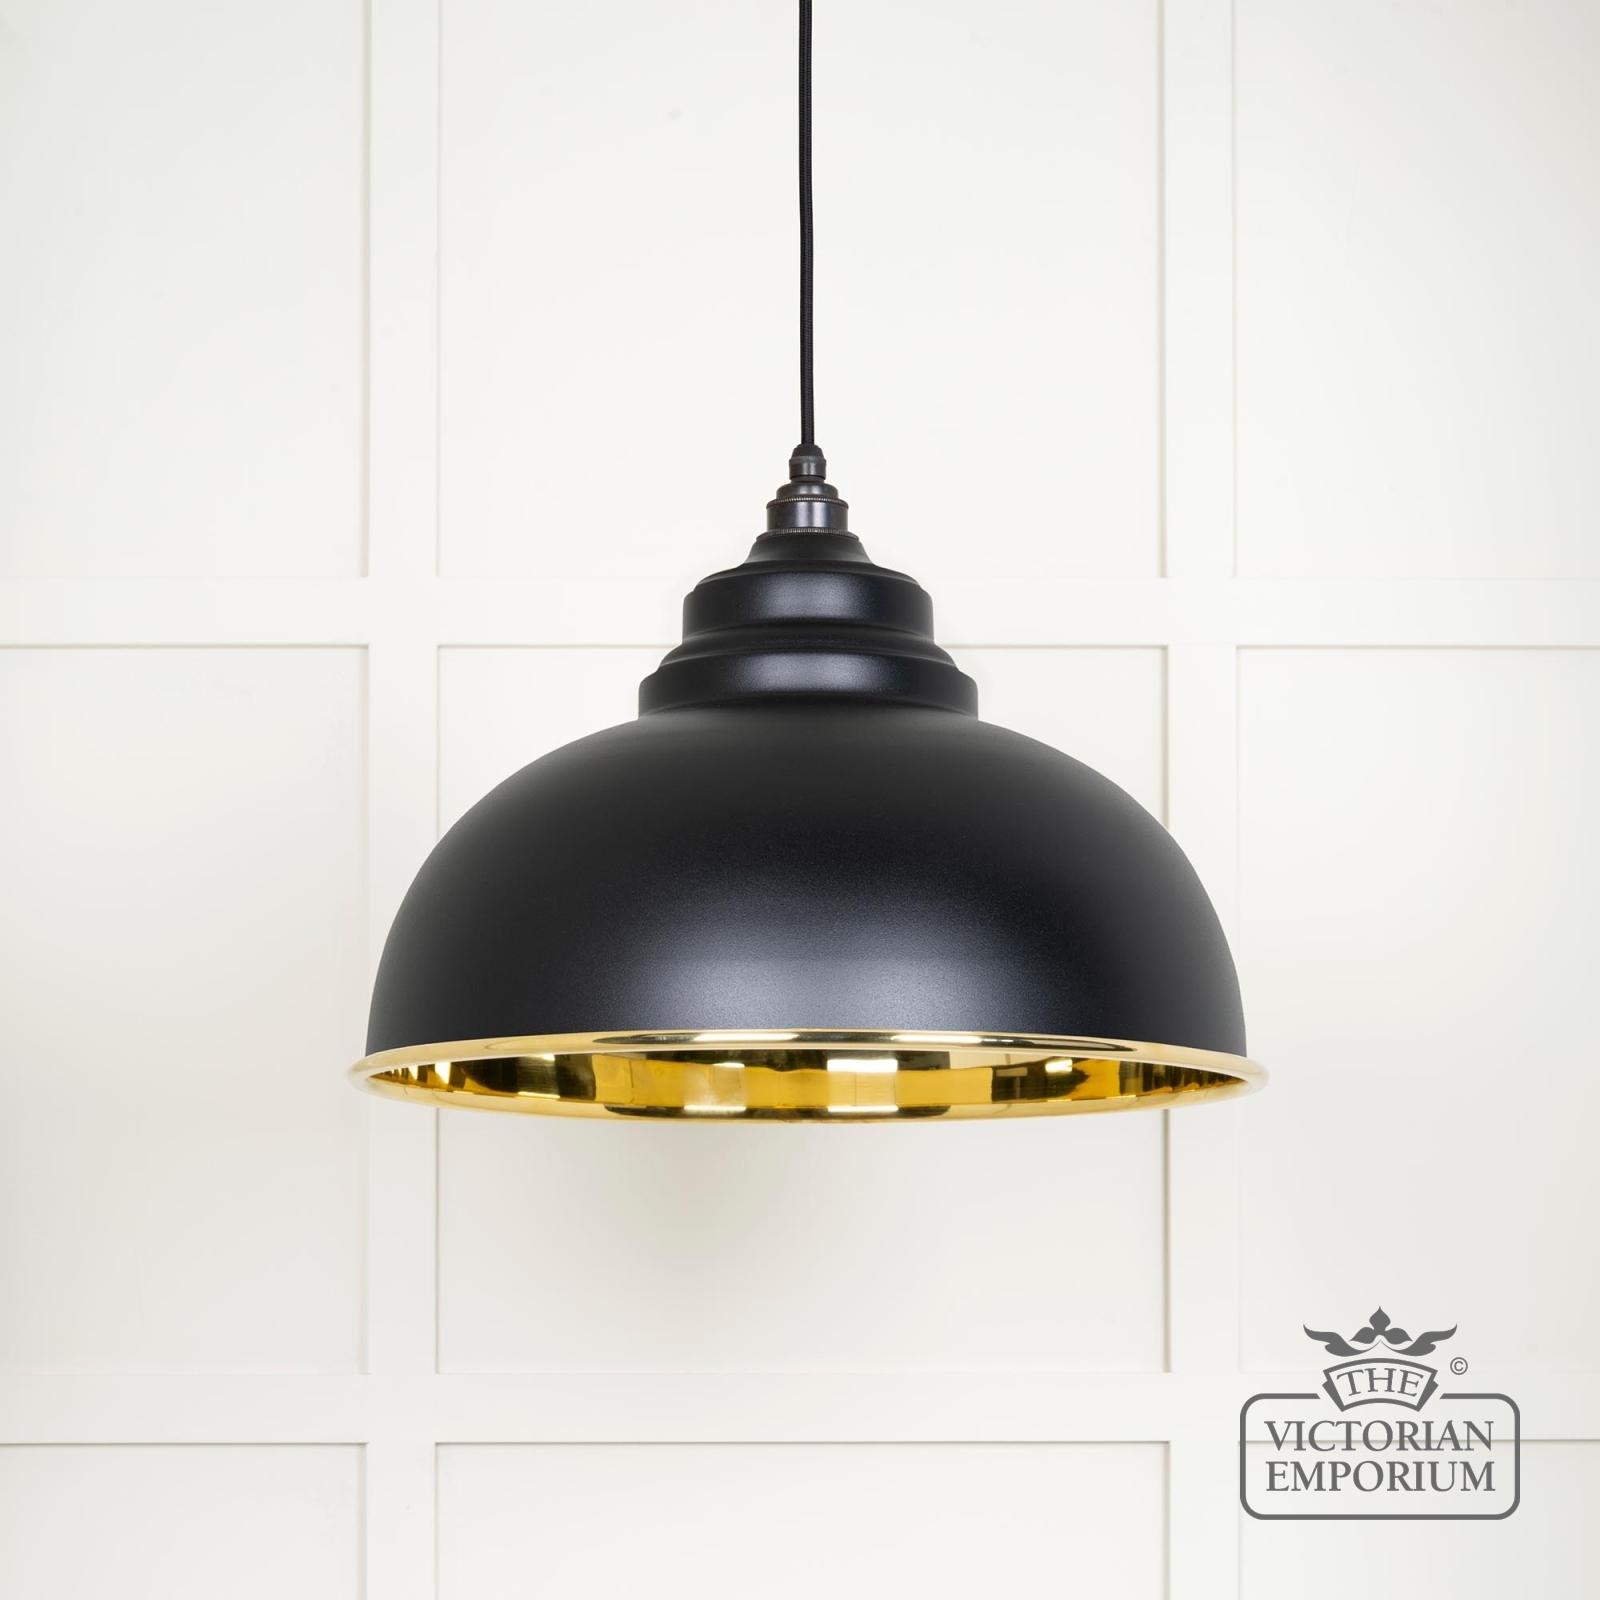 Harlow pendant light in smooth brass with painted Black exterior